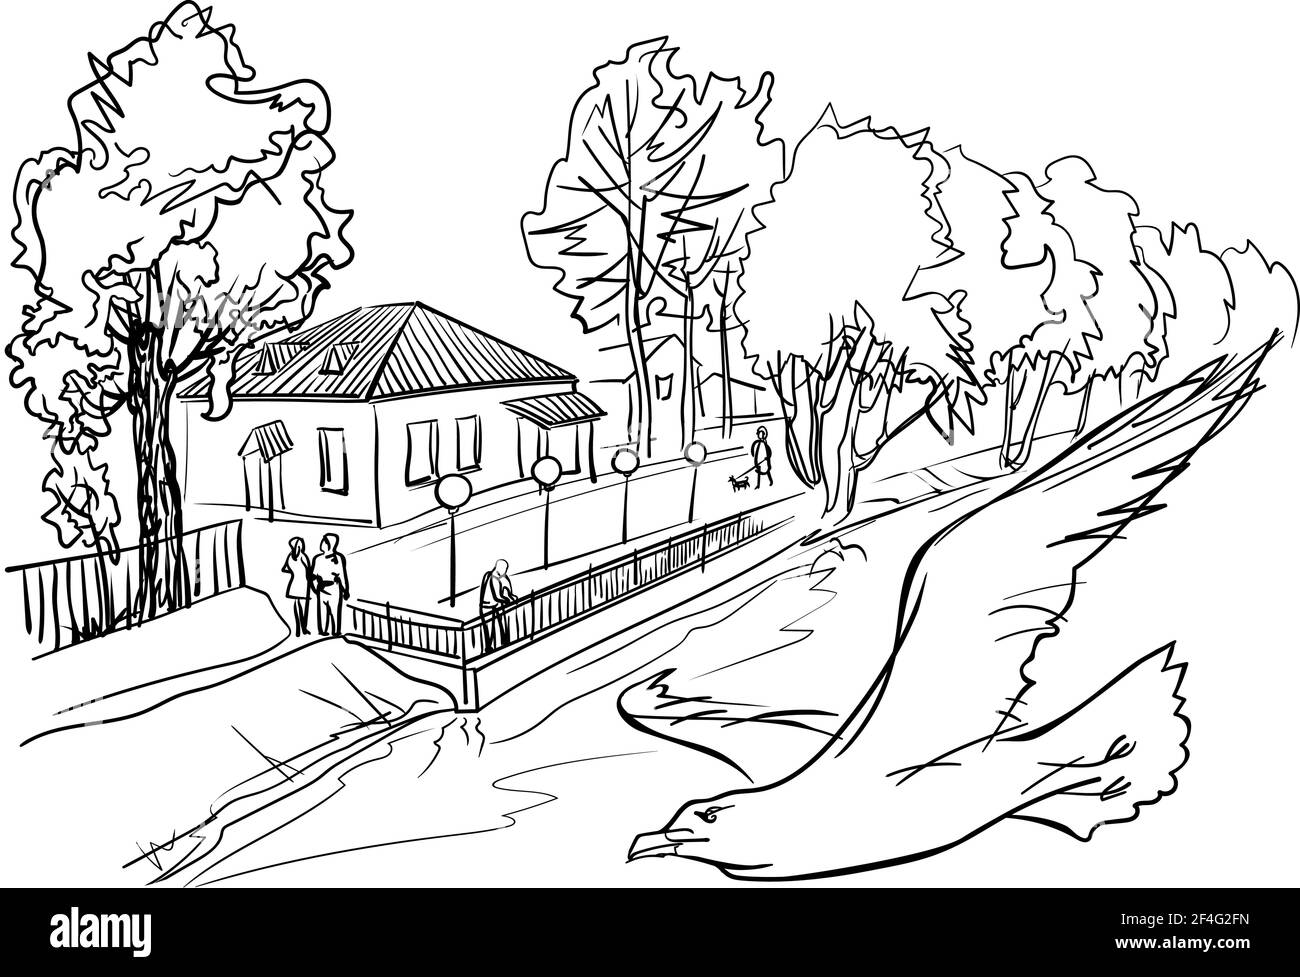 Town embankment on a summer day. In the foreground, a seagull is flying over the water. Monochrome line graphics by pen. Stock Vector